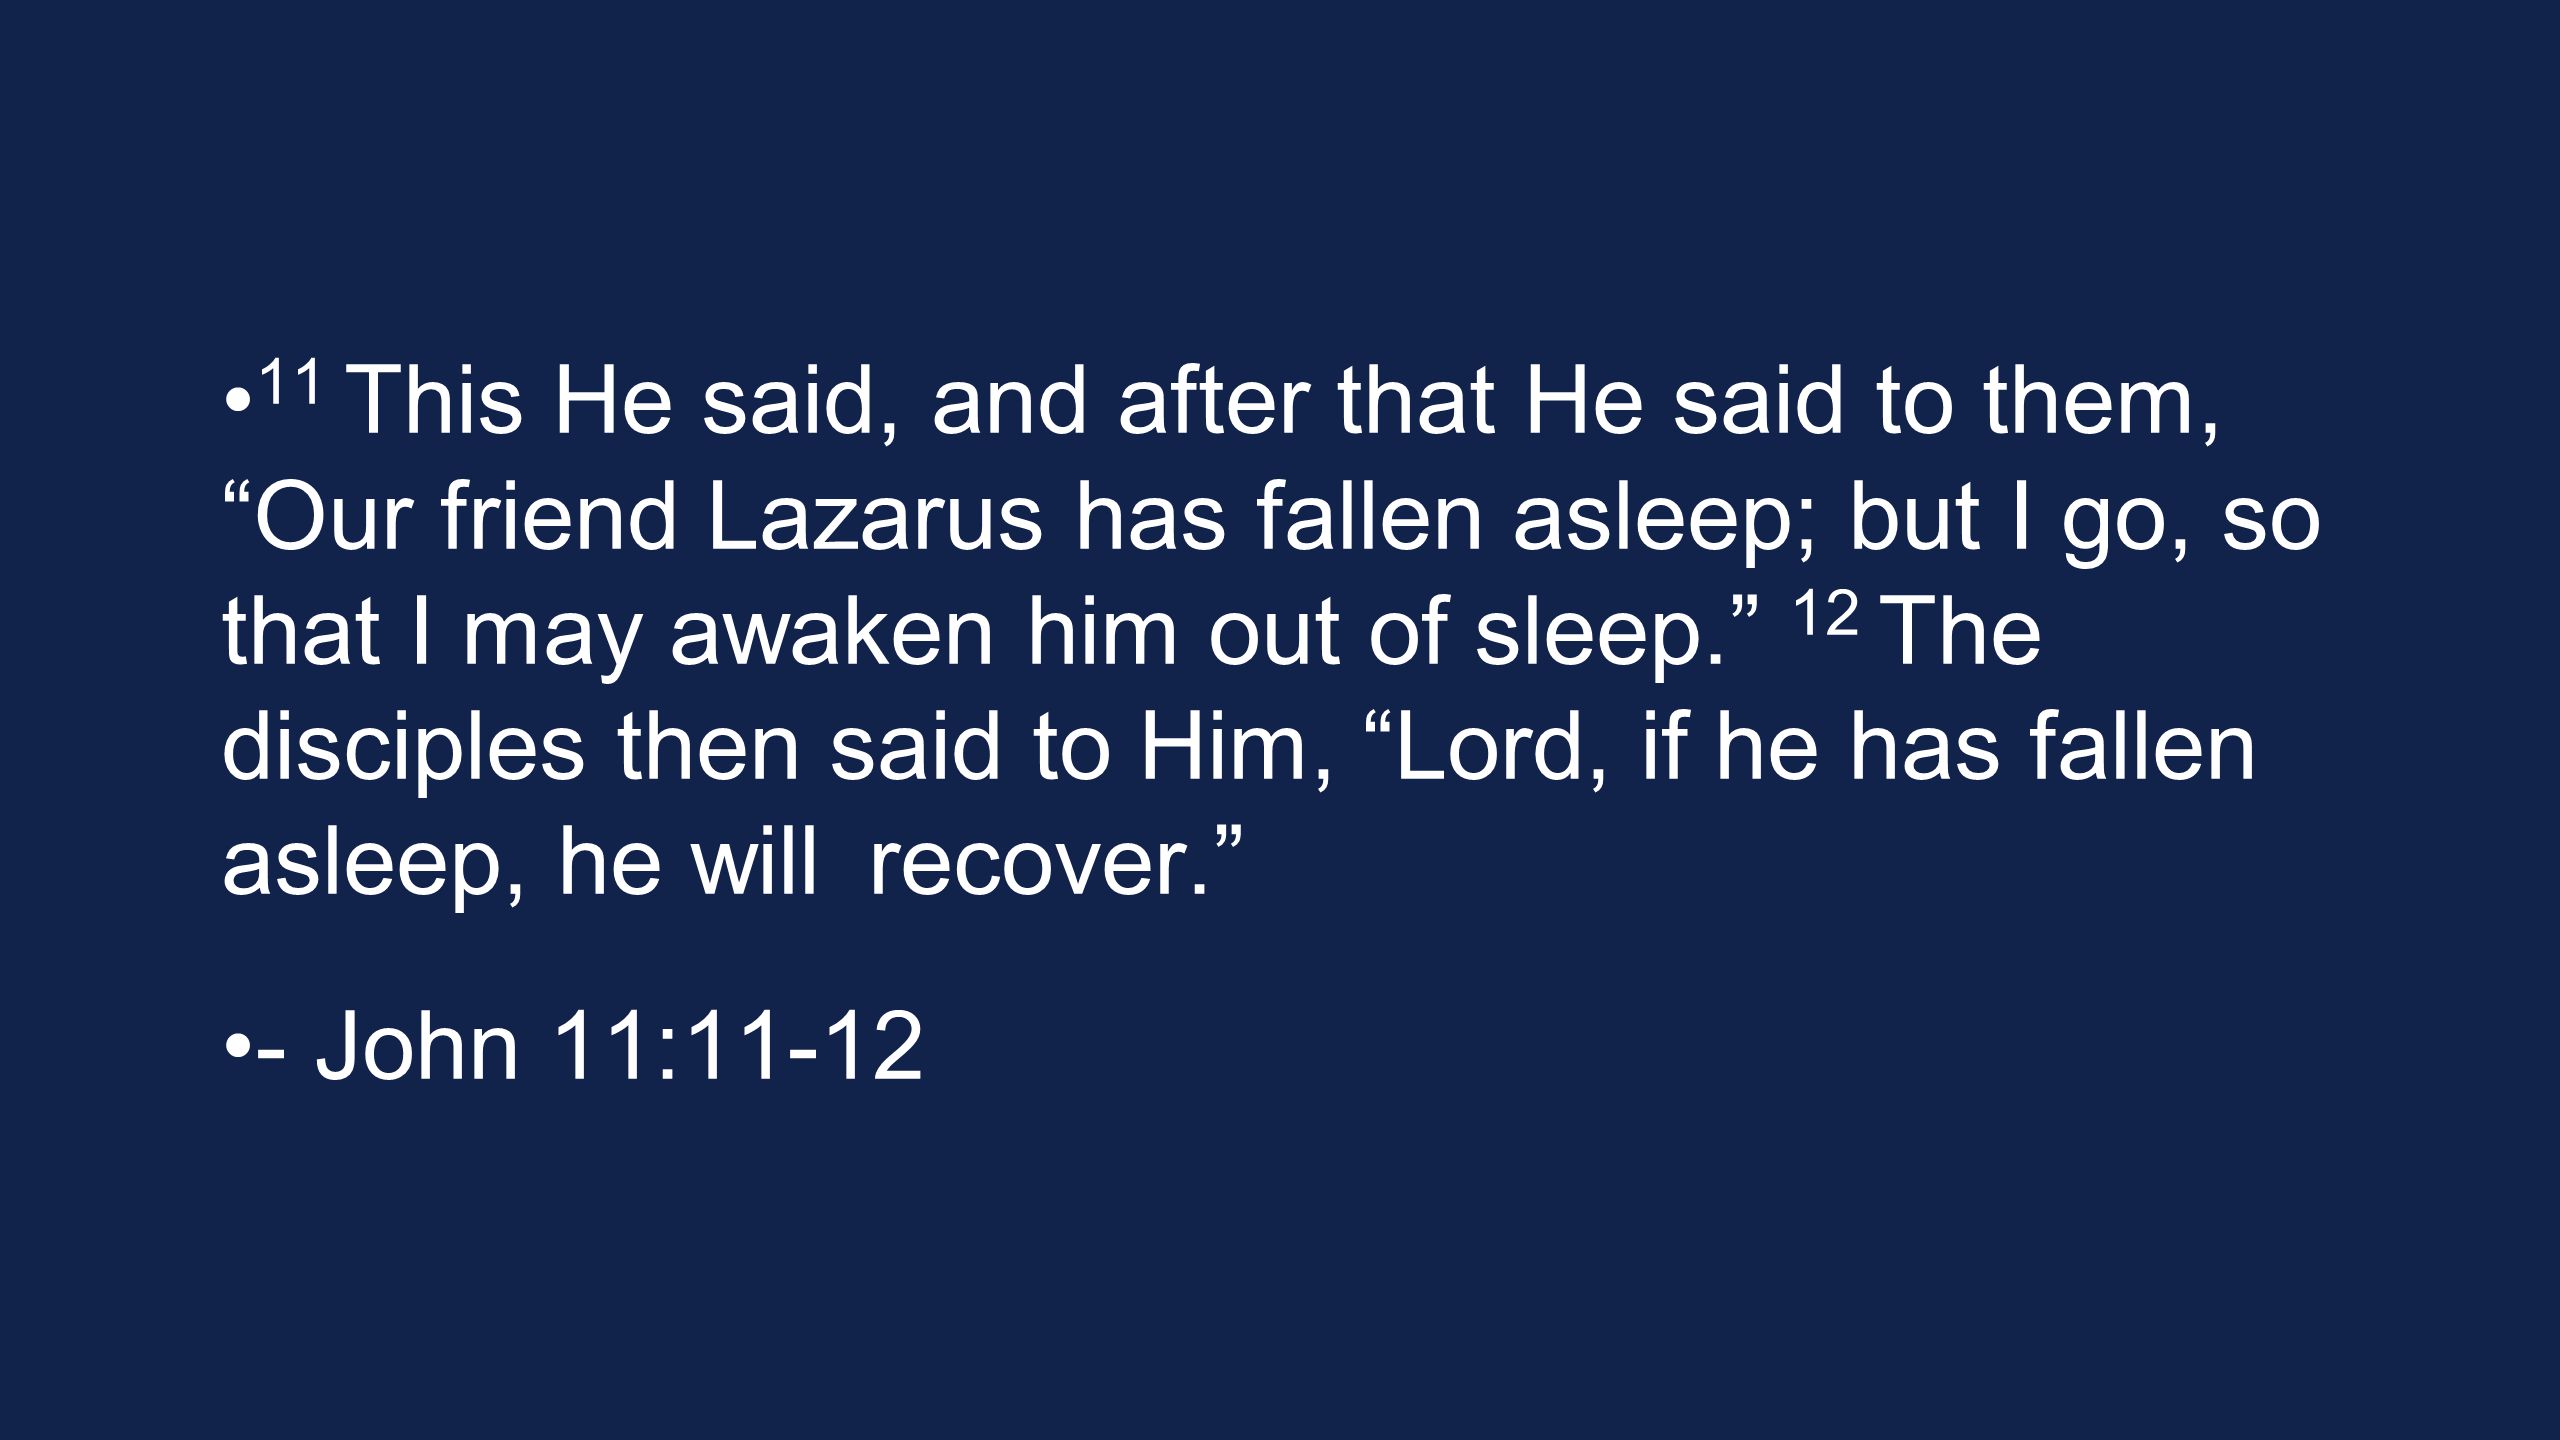 11 This He said, and after that He said to them, Our friend Lazarus has fallen asleep; but I go, so that I may awaken him out of sleep. 12 The disciples then said to Him, Lord, if he has fallen asleep, he will recover. - John 11:11-12